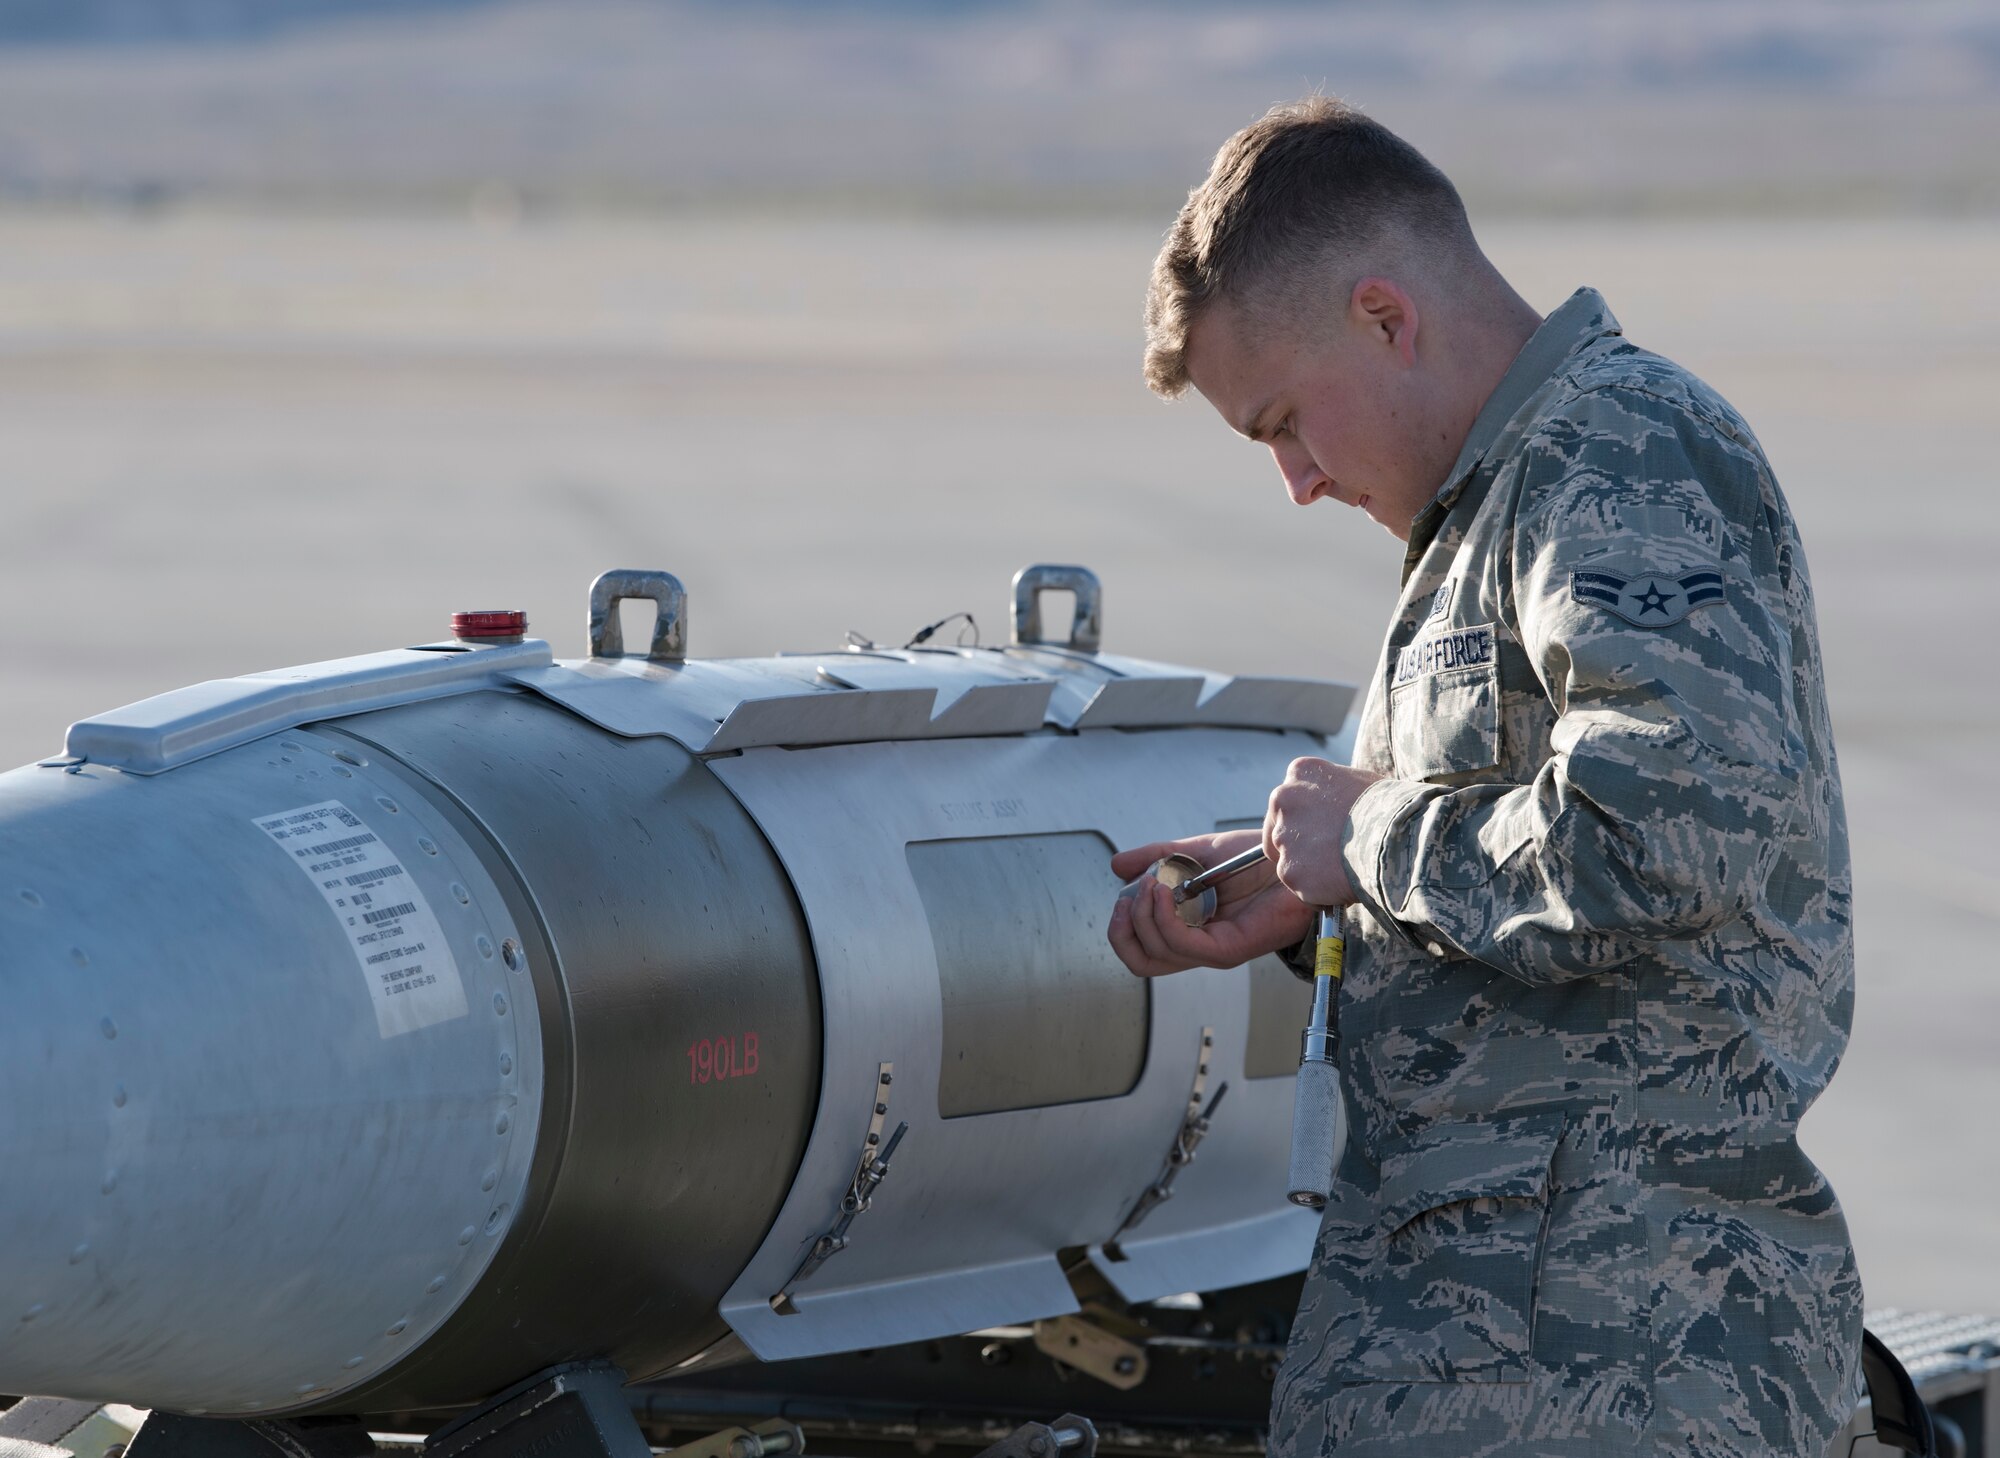 Airman 1st Class Ryan Henderson, 57th Aircraft Maintenance Squadron weapons loader, prepares a bomb to be loaded during a load crew competition at Nellis Air Force Base, Nevada, April 13, 2018. The competition challenges the teams' ability to load munitions on aircraft in an accurate, safe and timely manner.(U.S. Air Force photo by Airman 1st Class Andrew D. Sarver)